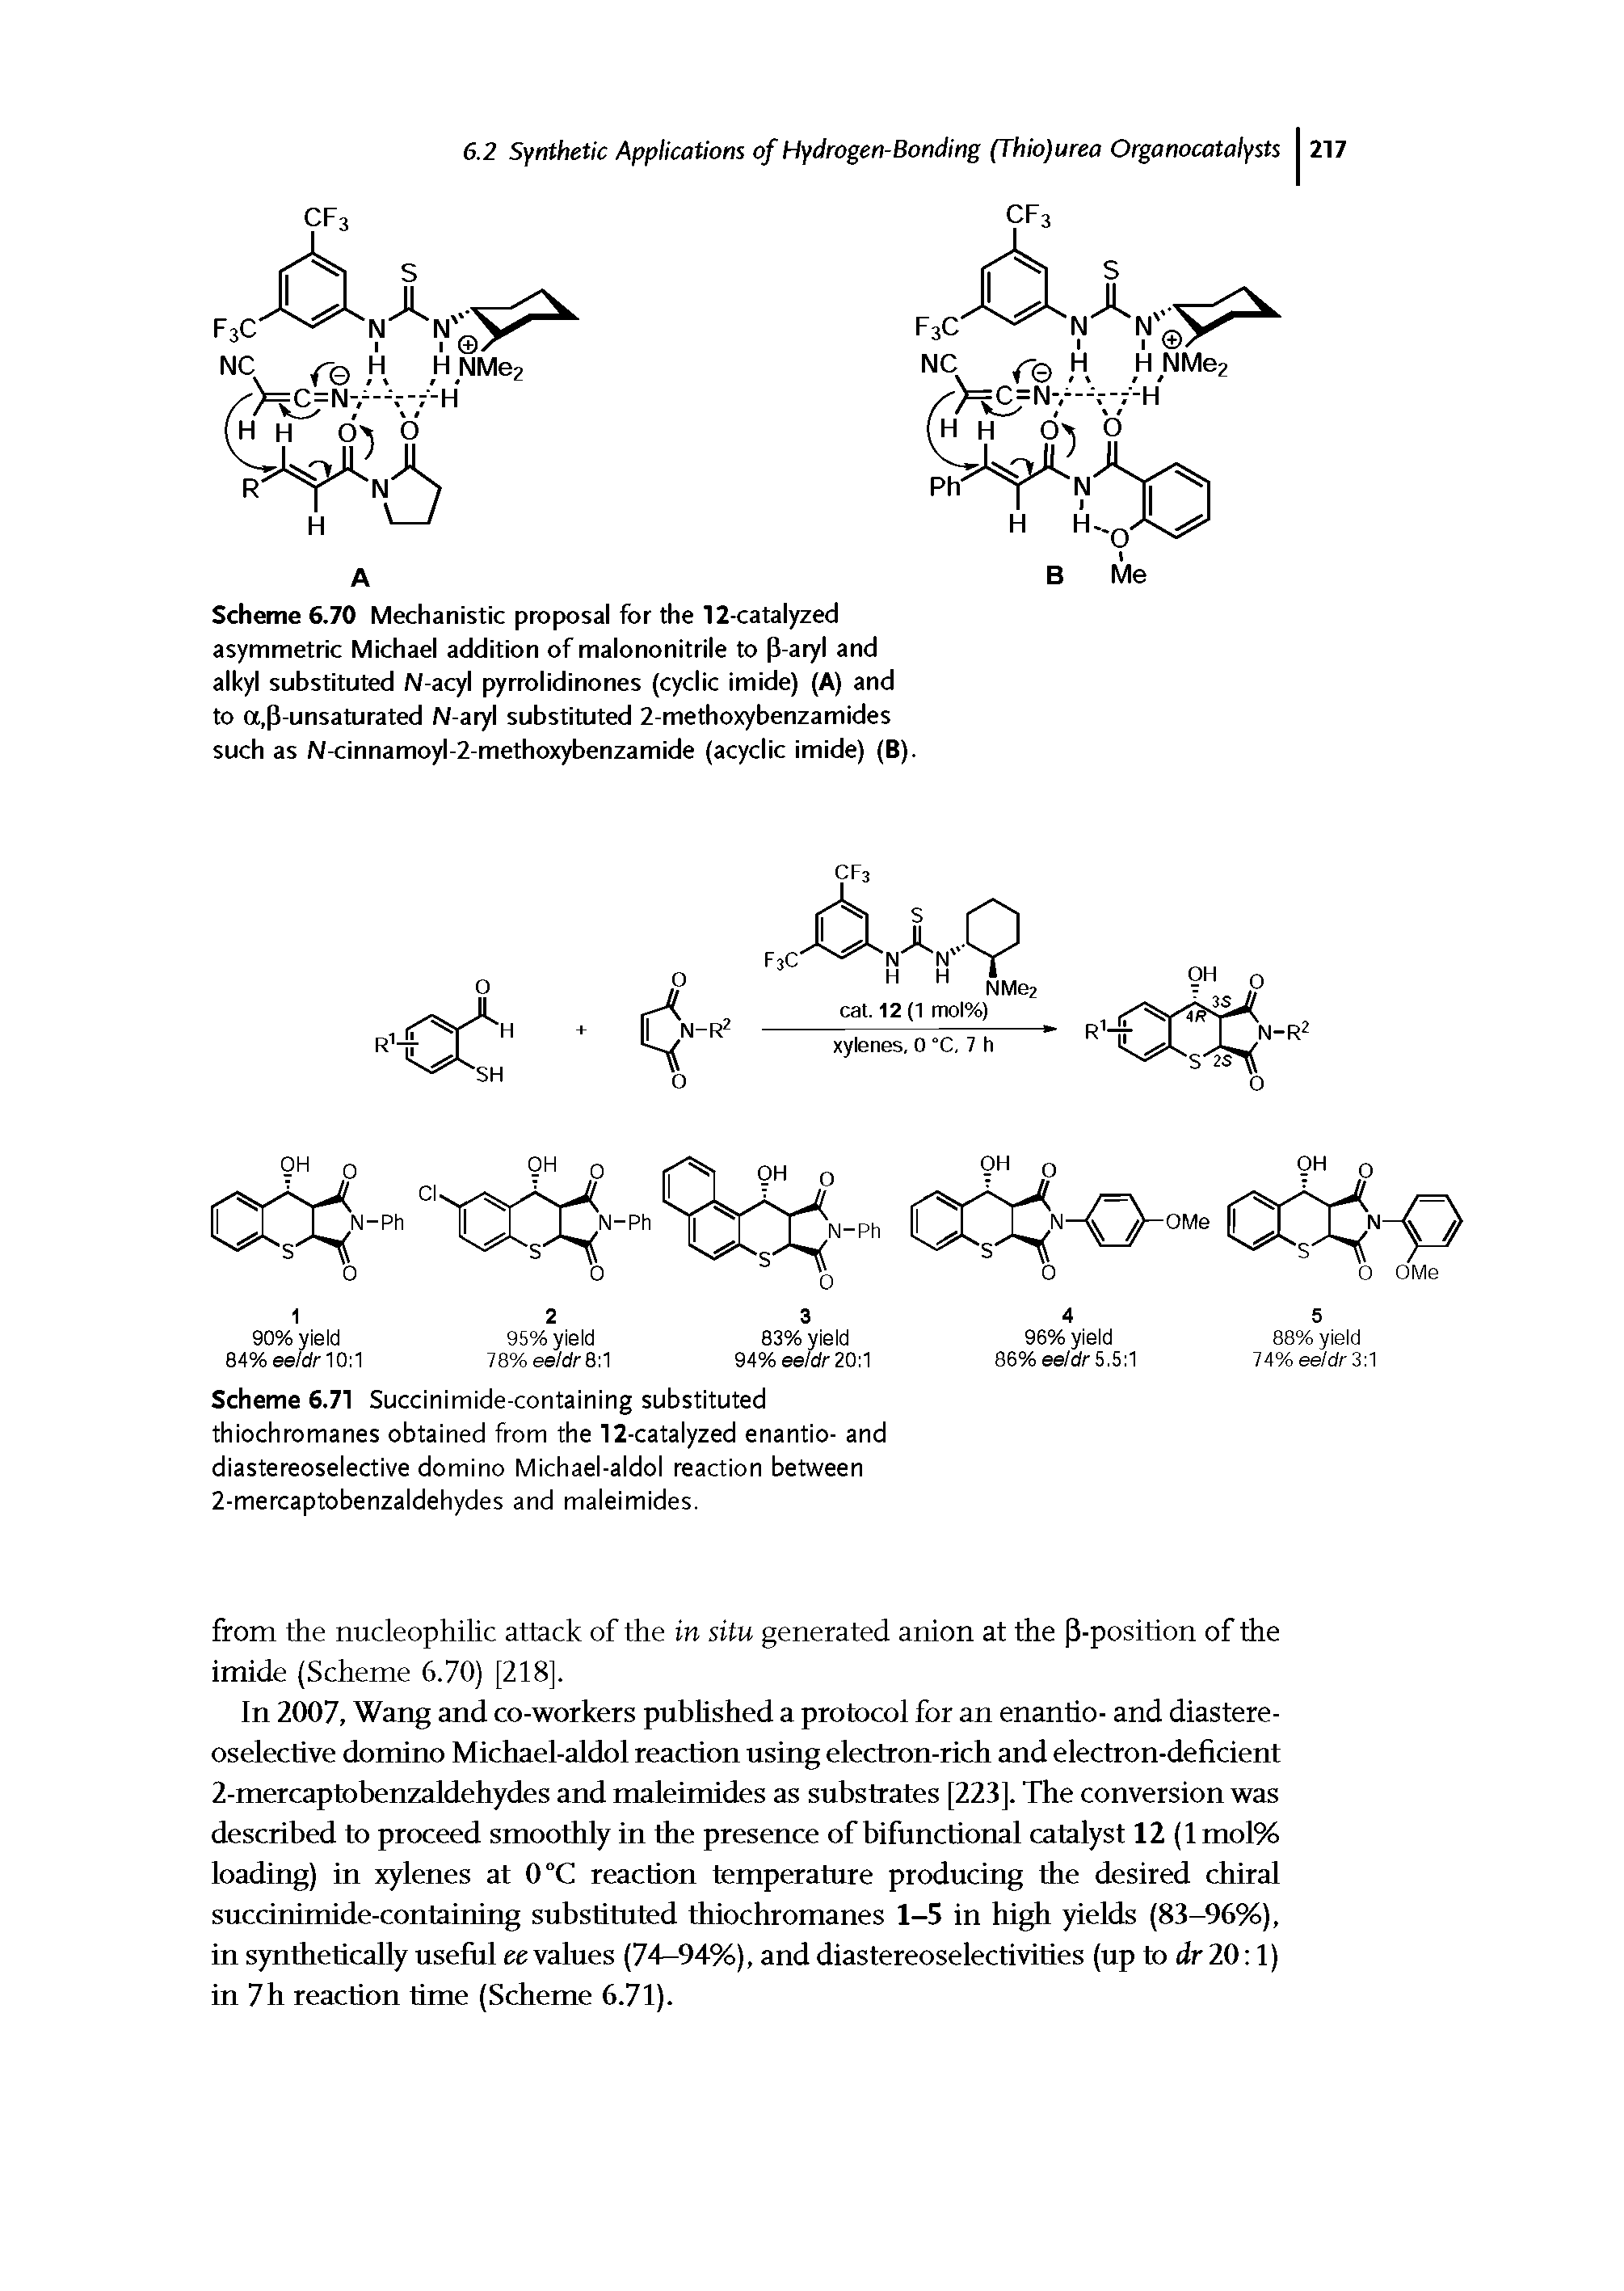 Scheme 6.70 Mechanistic proposal for the 12-catalyzed asymmetric Michael addition of malononitrile to (J-aryl and alkyl substituted N-acyl pyrrolidinones (cyclic imide) (A) and to a,P-unsaturated N-aryl substituted 2-methoxybenzamides such as N-cinnamoyl-2-methoxybenzamide (acyclic imide) (B).